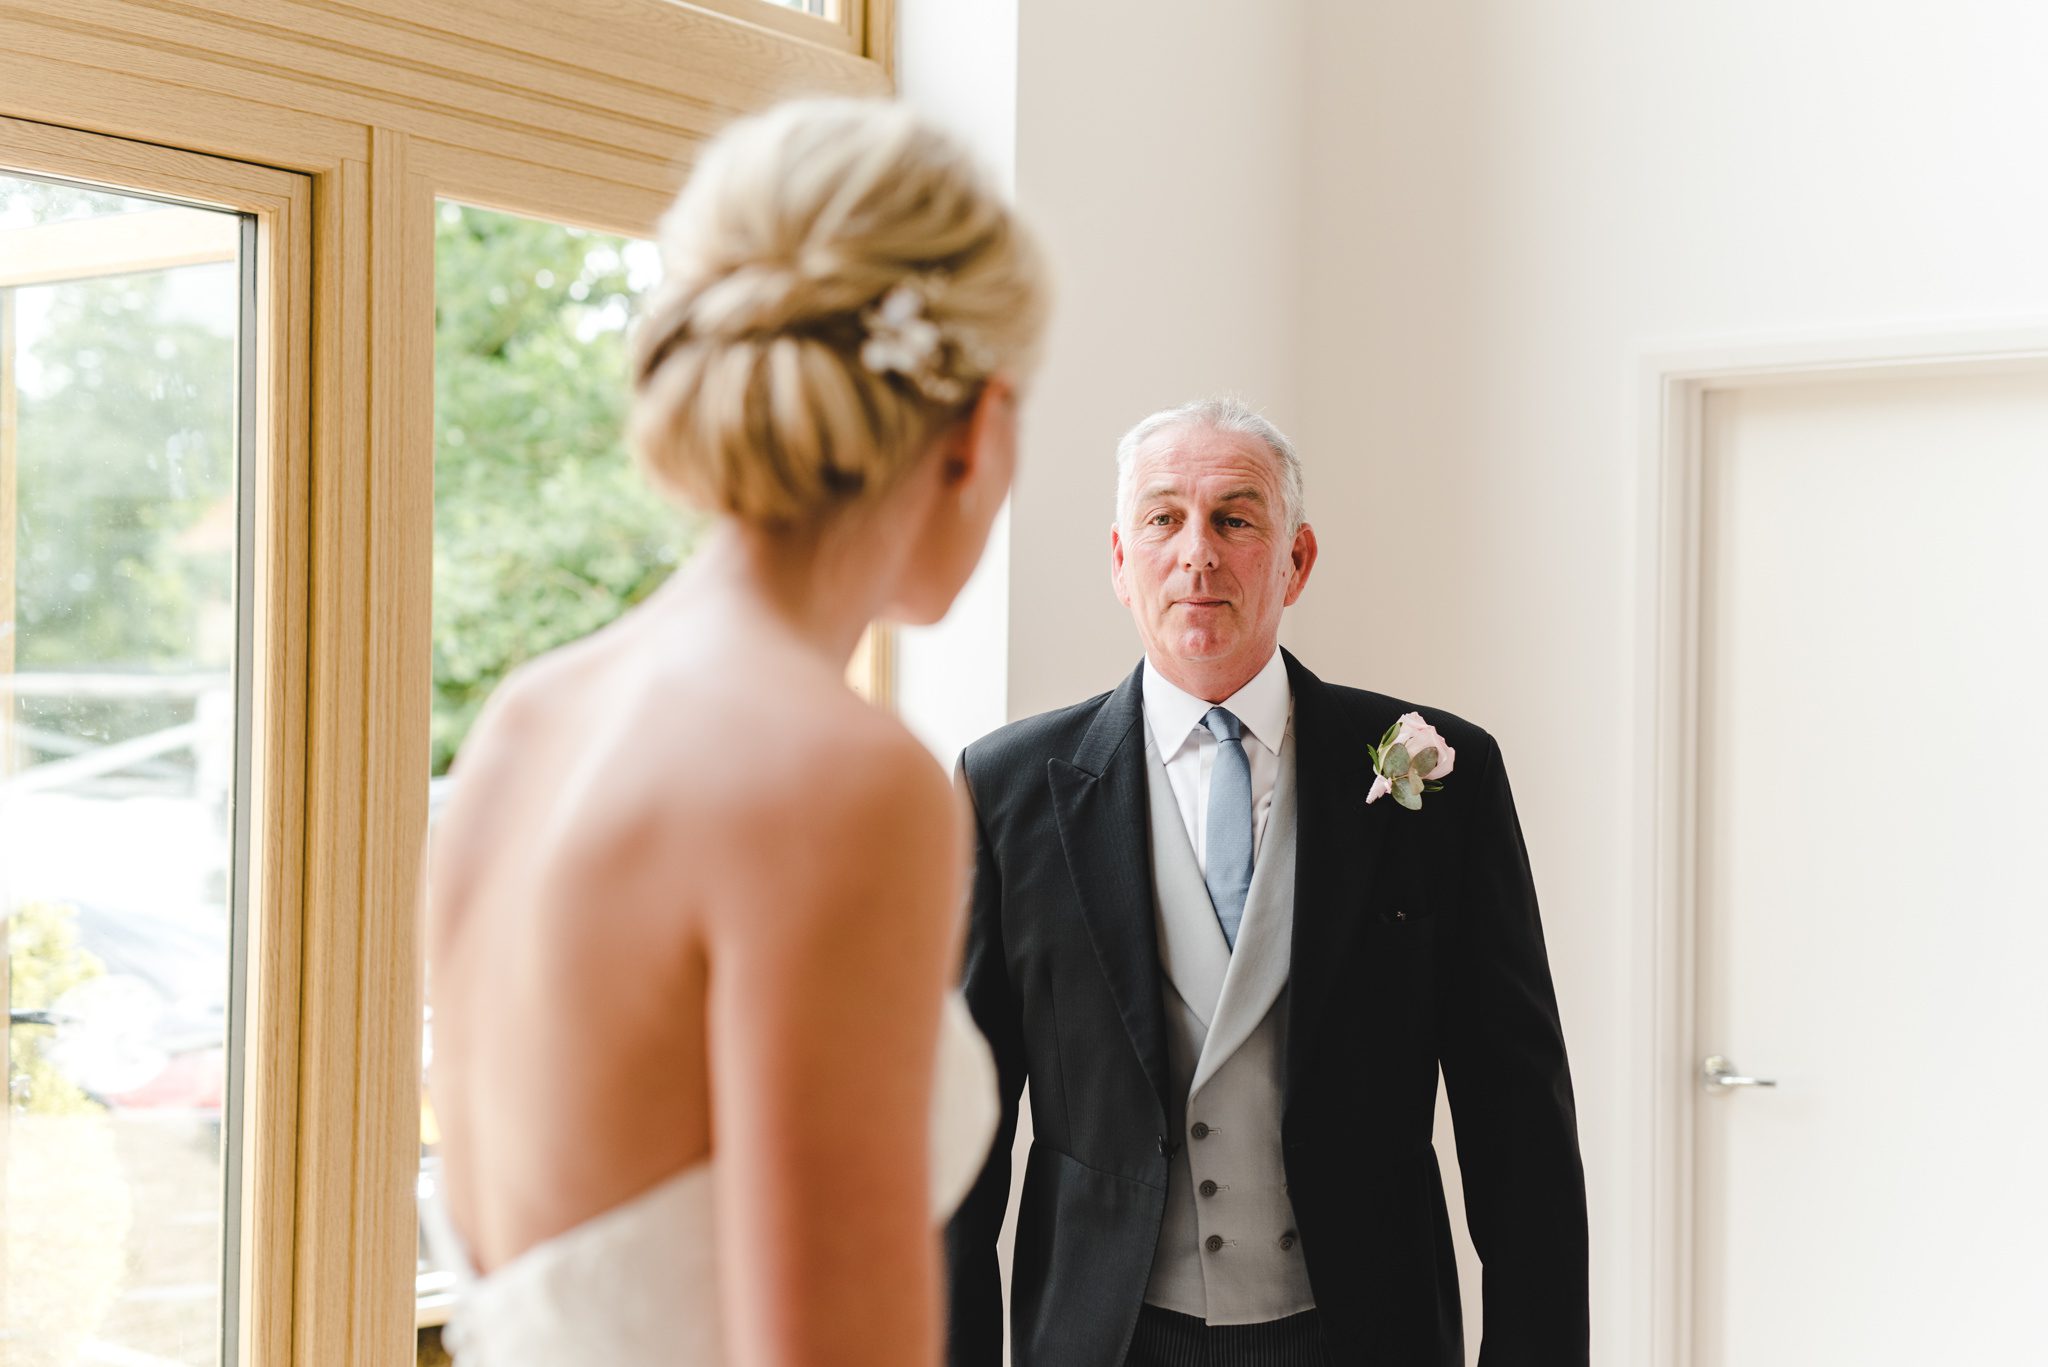 A father seeing his daughter in her wedding dress for the first time